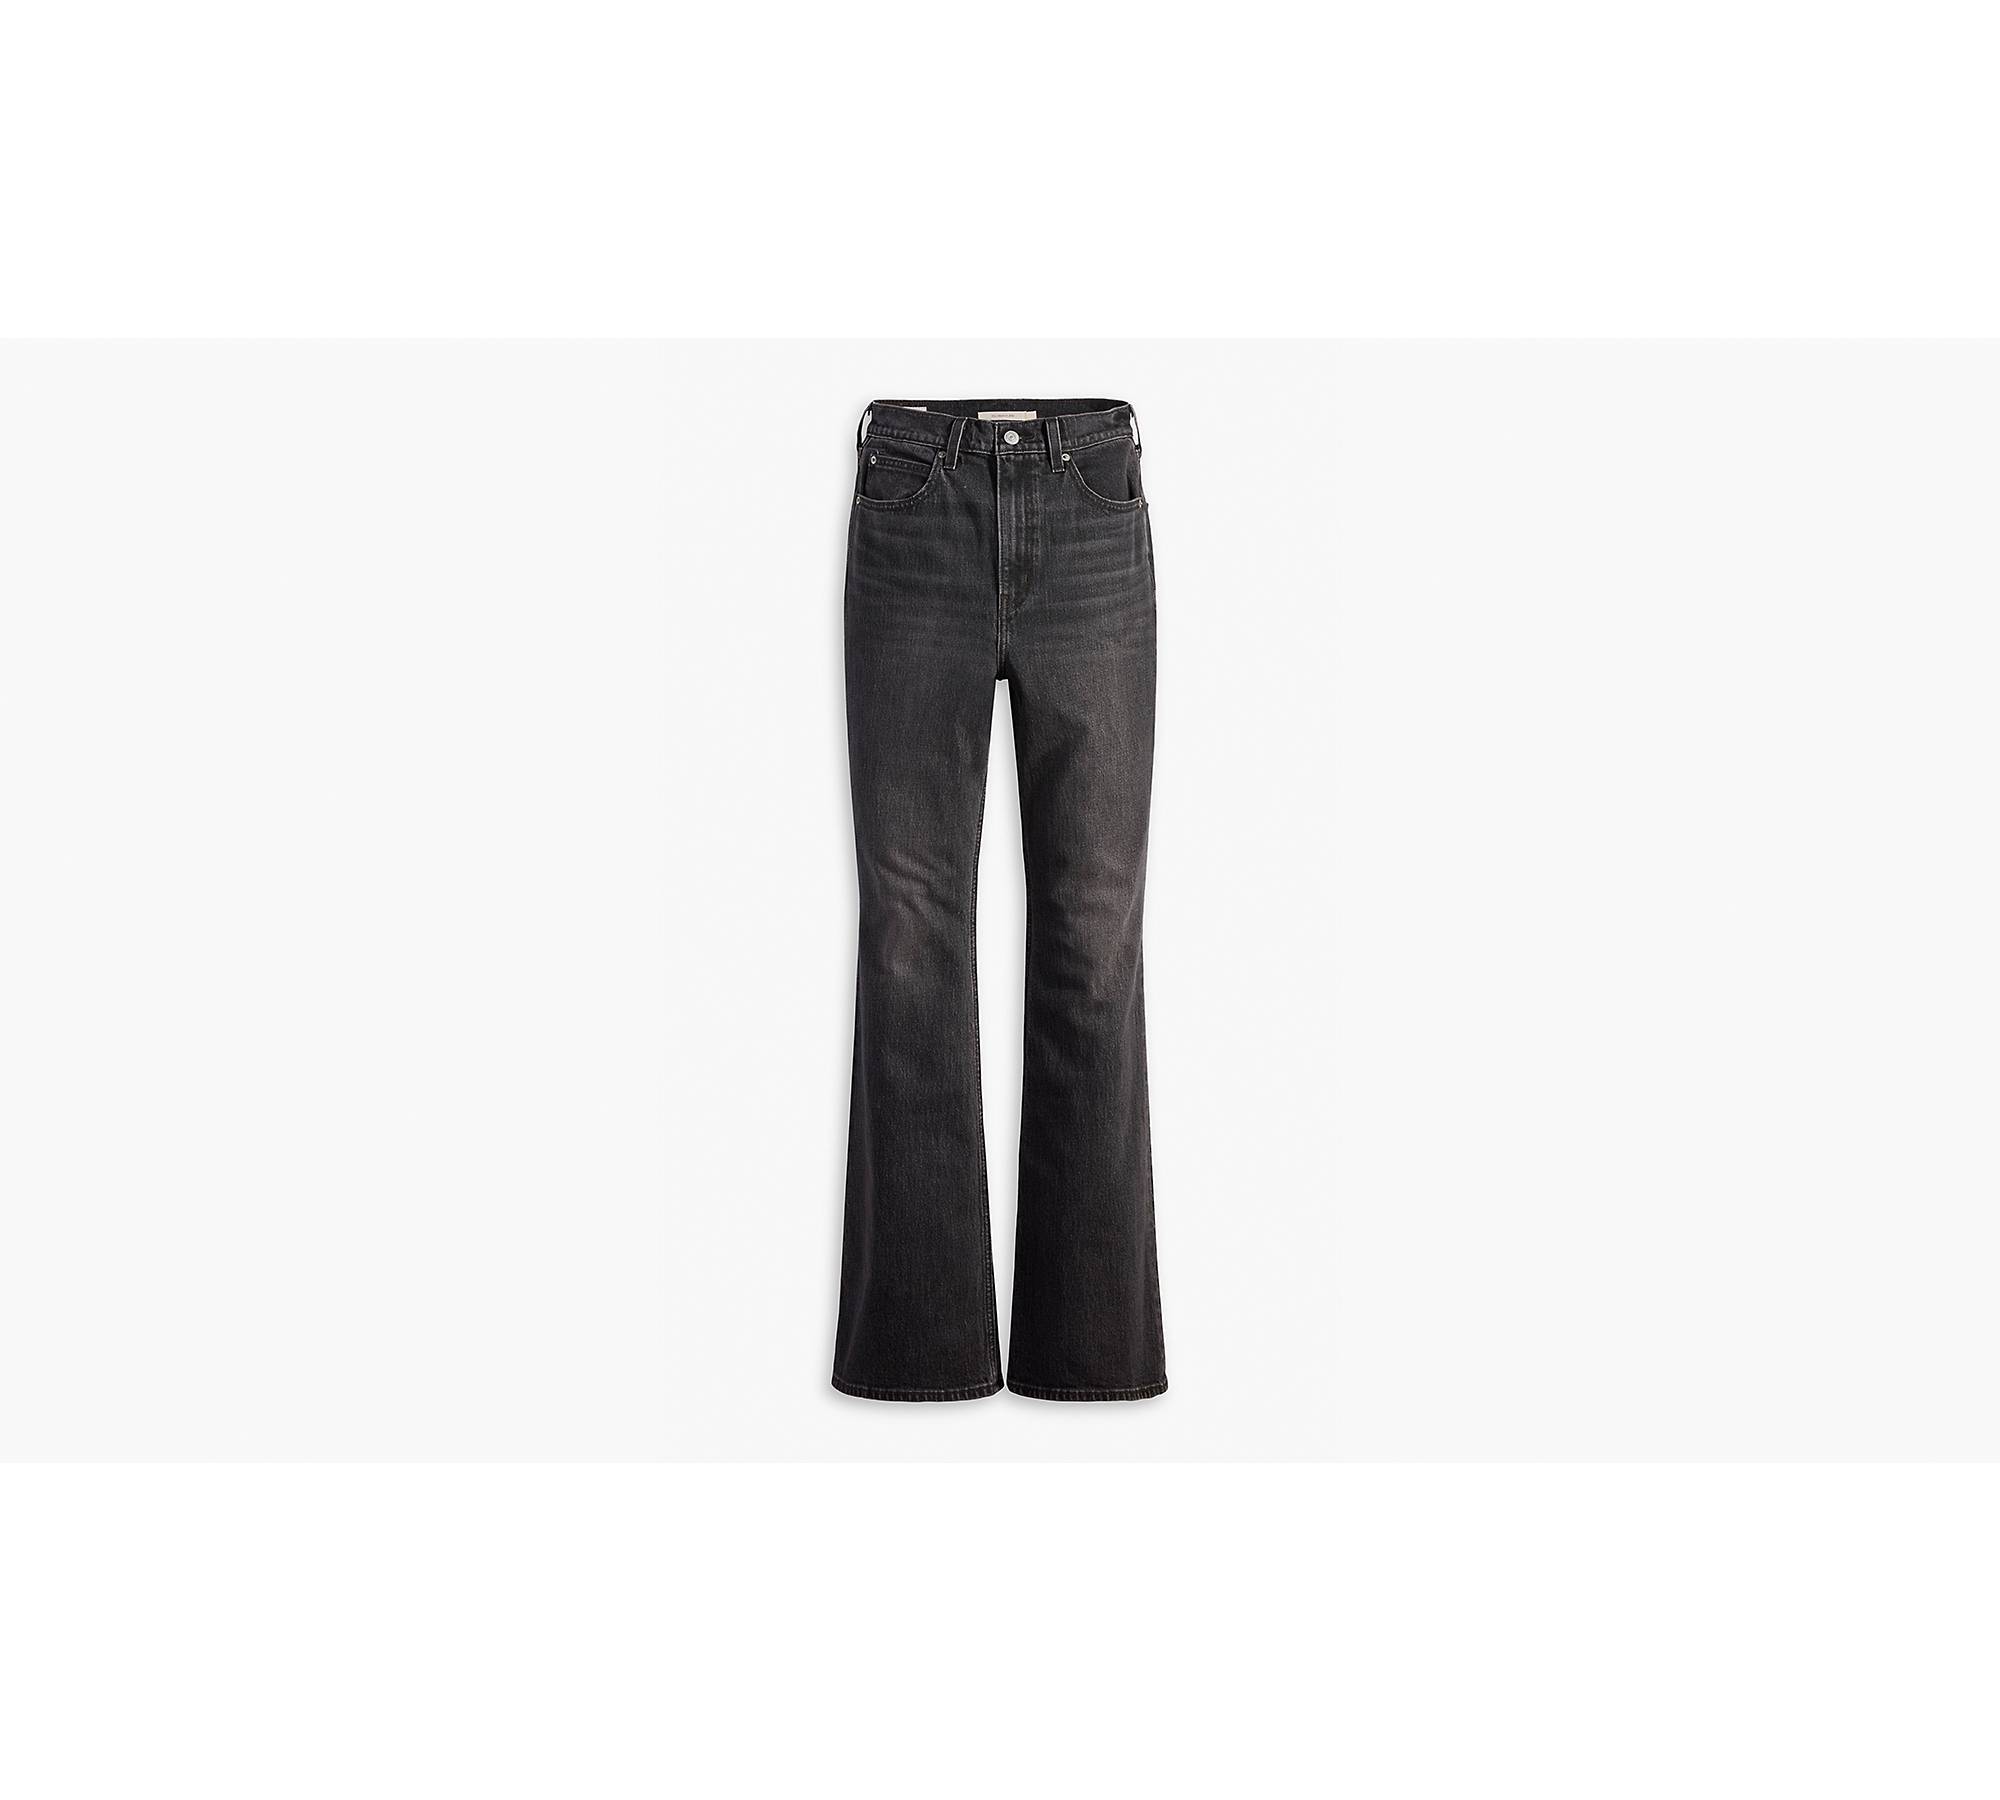 Black 70's High Flare Jeans by Levi's on Sale